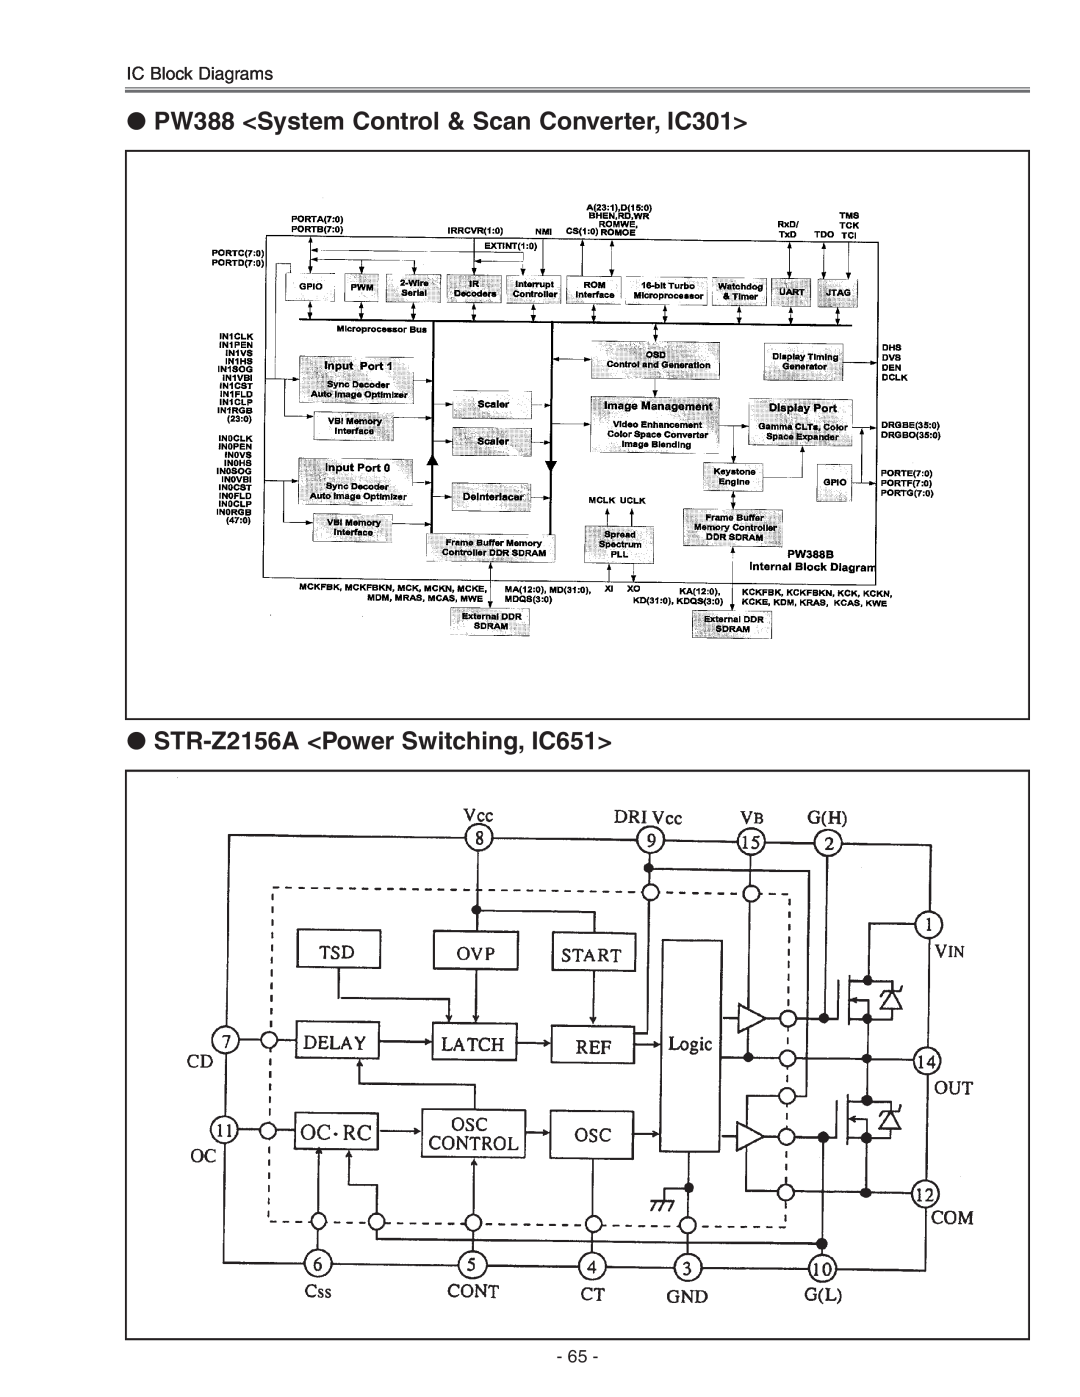 Eiki LC-X71 LC-X71L PW388 System Control & Scan Converter, IC301, STR-Z2156A Power Switching, IC651, IC Block Diagrams 